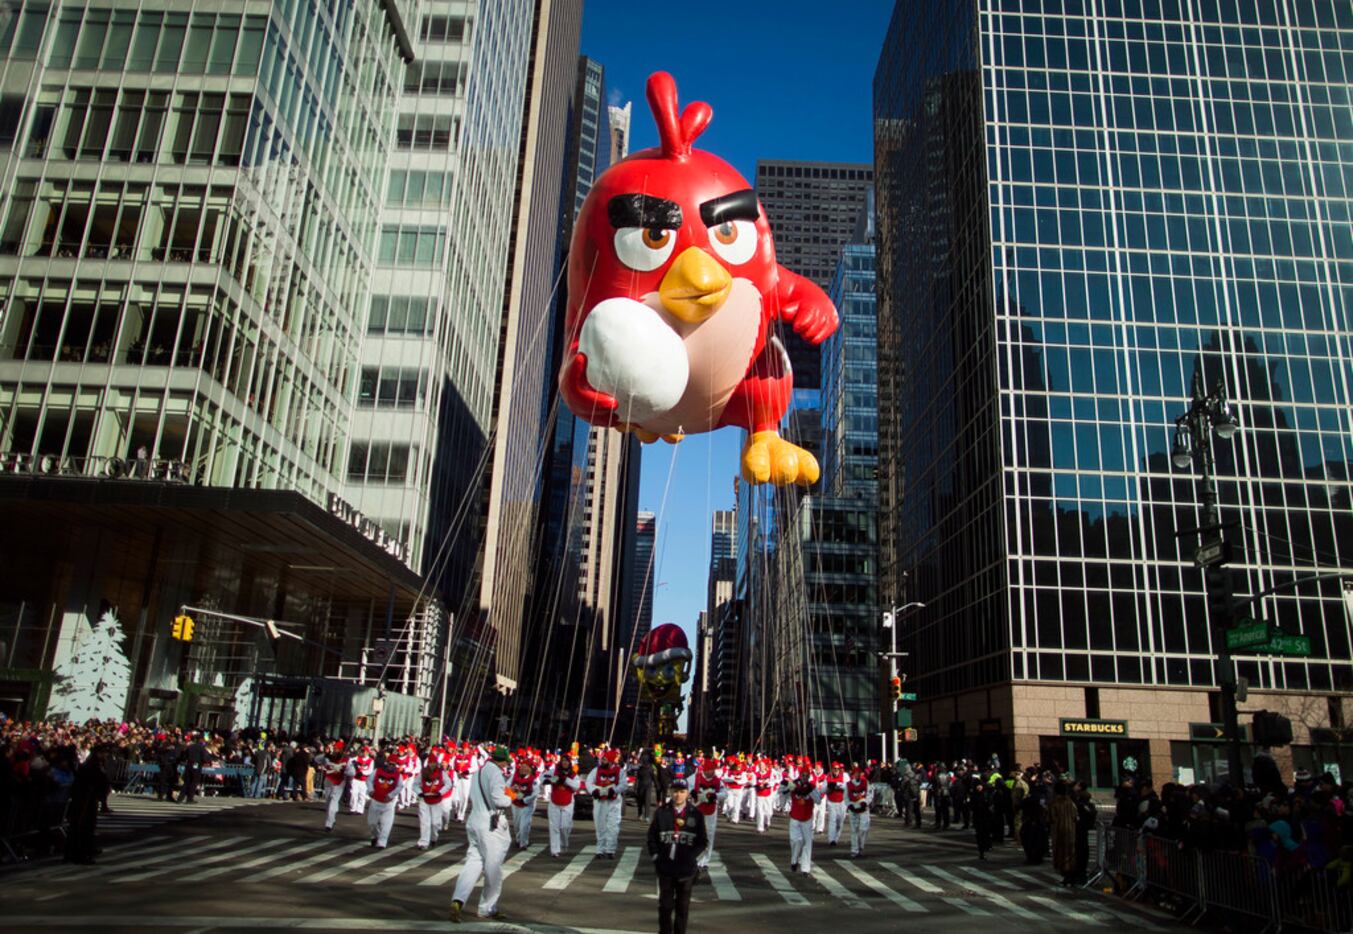 Who could possibly be angry at the Macy's Thanksgiving Day Parade in New York? Angry Birds...